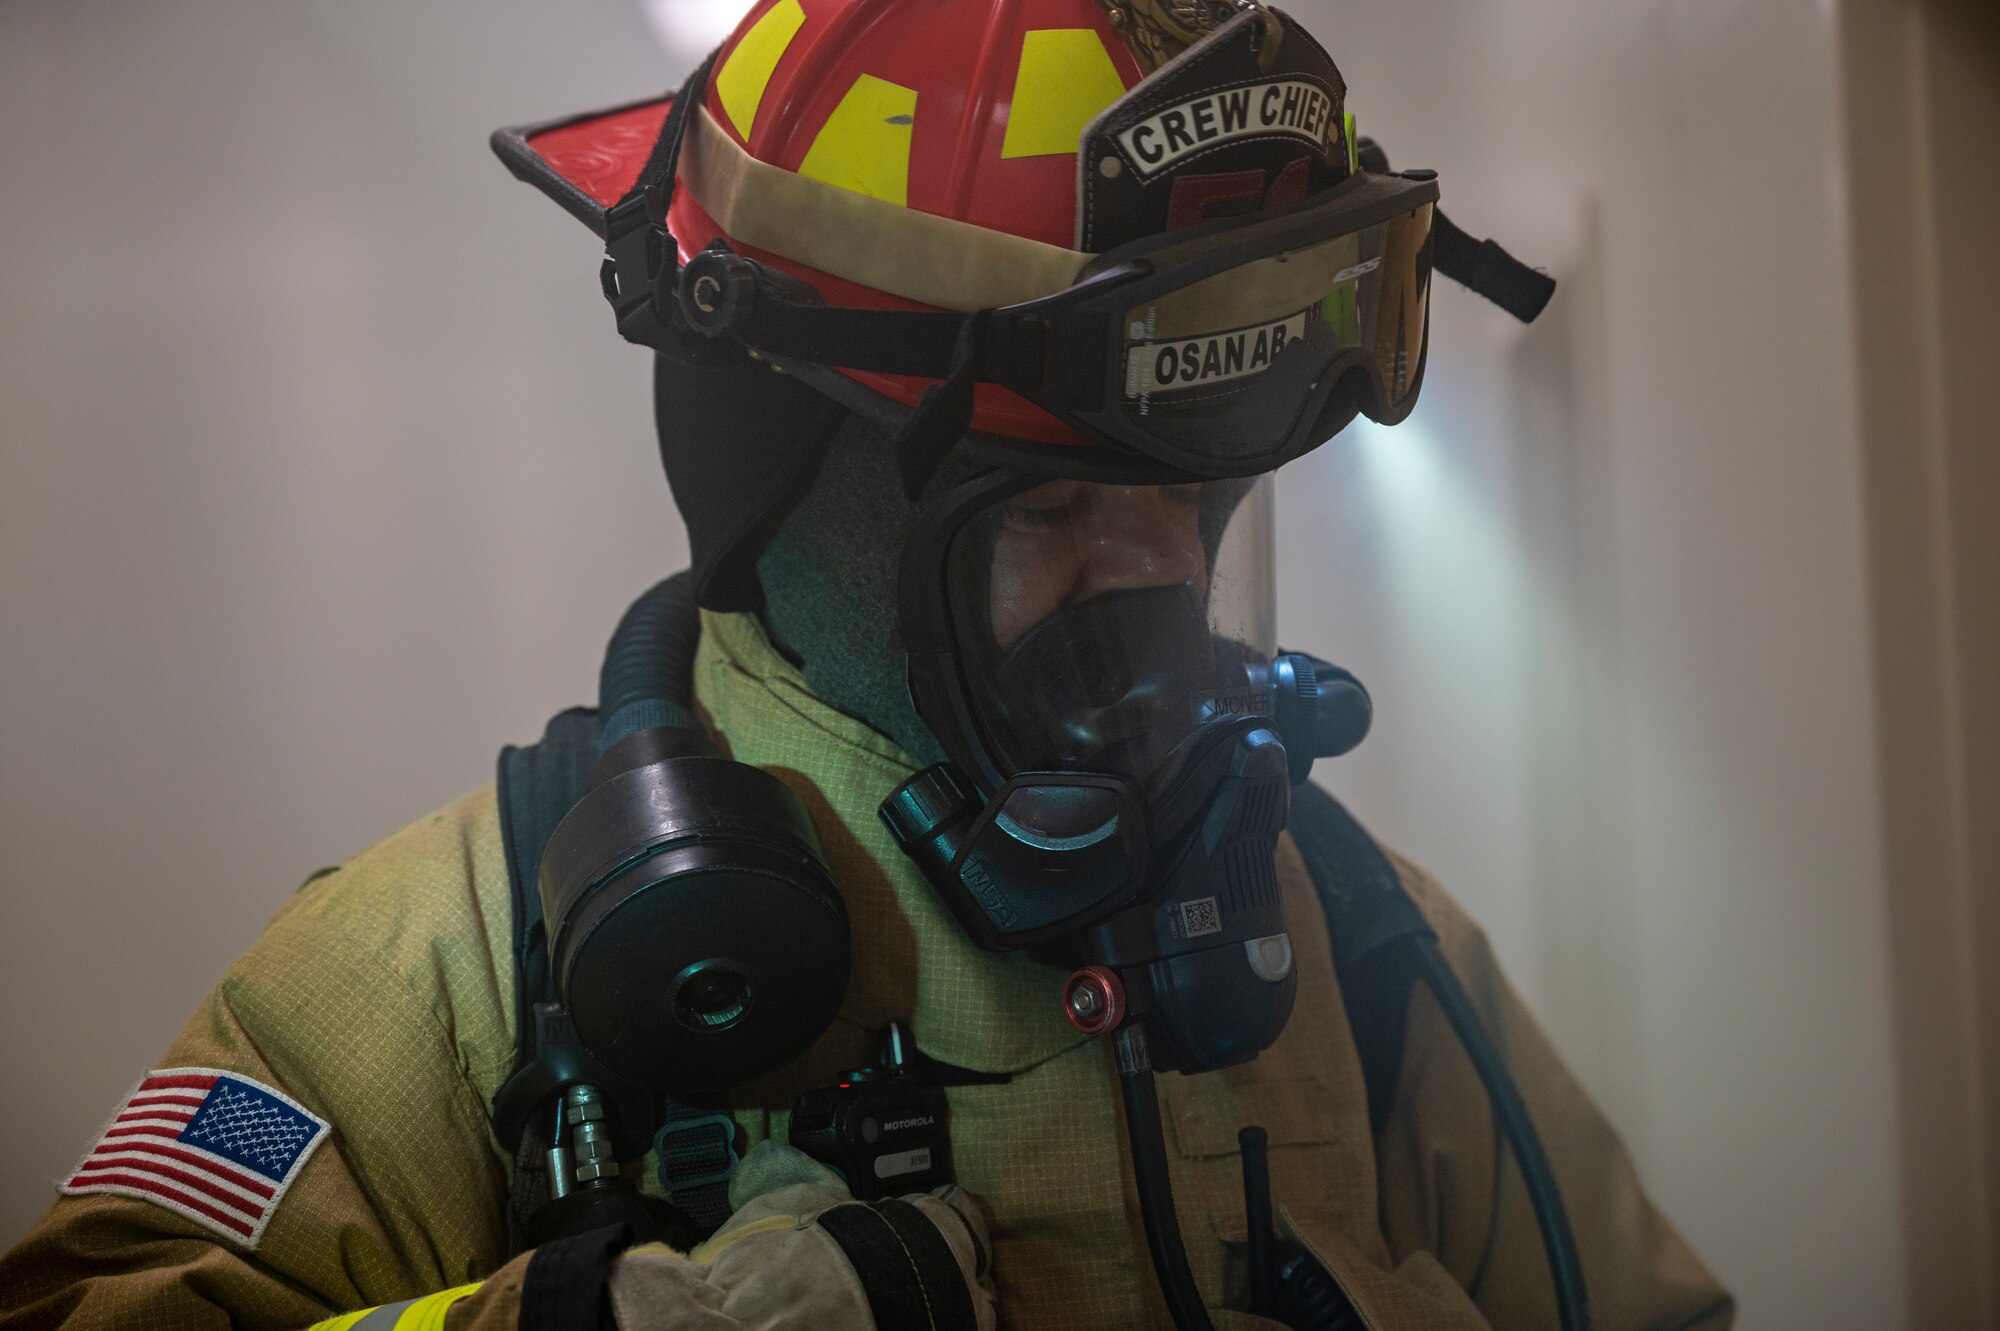 U.S. Air Force Staff Sgt. Larry McIver, 51st Civil Engineer Squadron lead firefighter, responds to radio traffic during a fire response training scenario at Osan Air Base, Republic of Korea, Sept. 14, 2022.